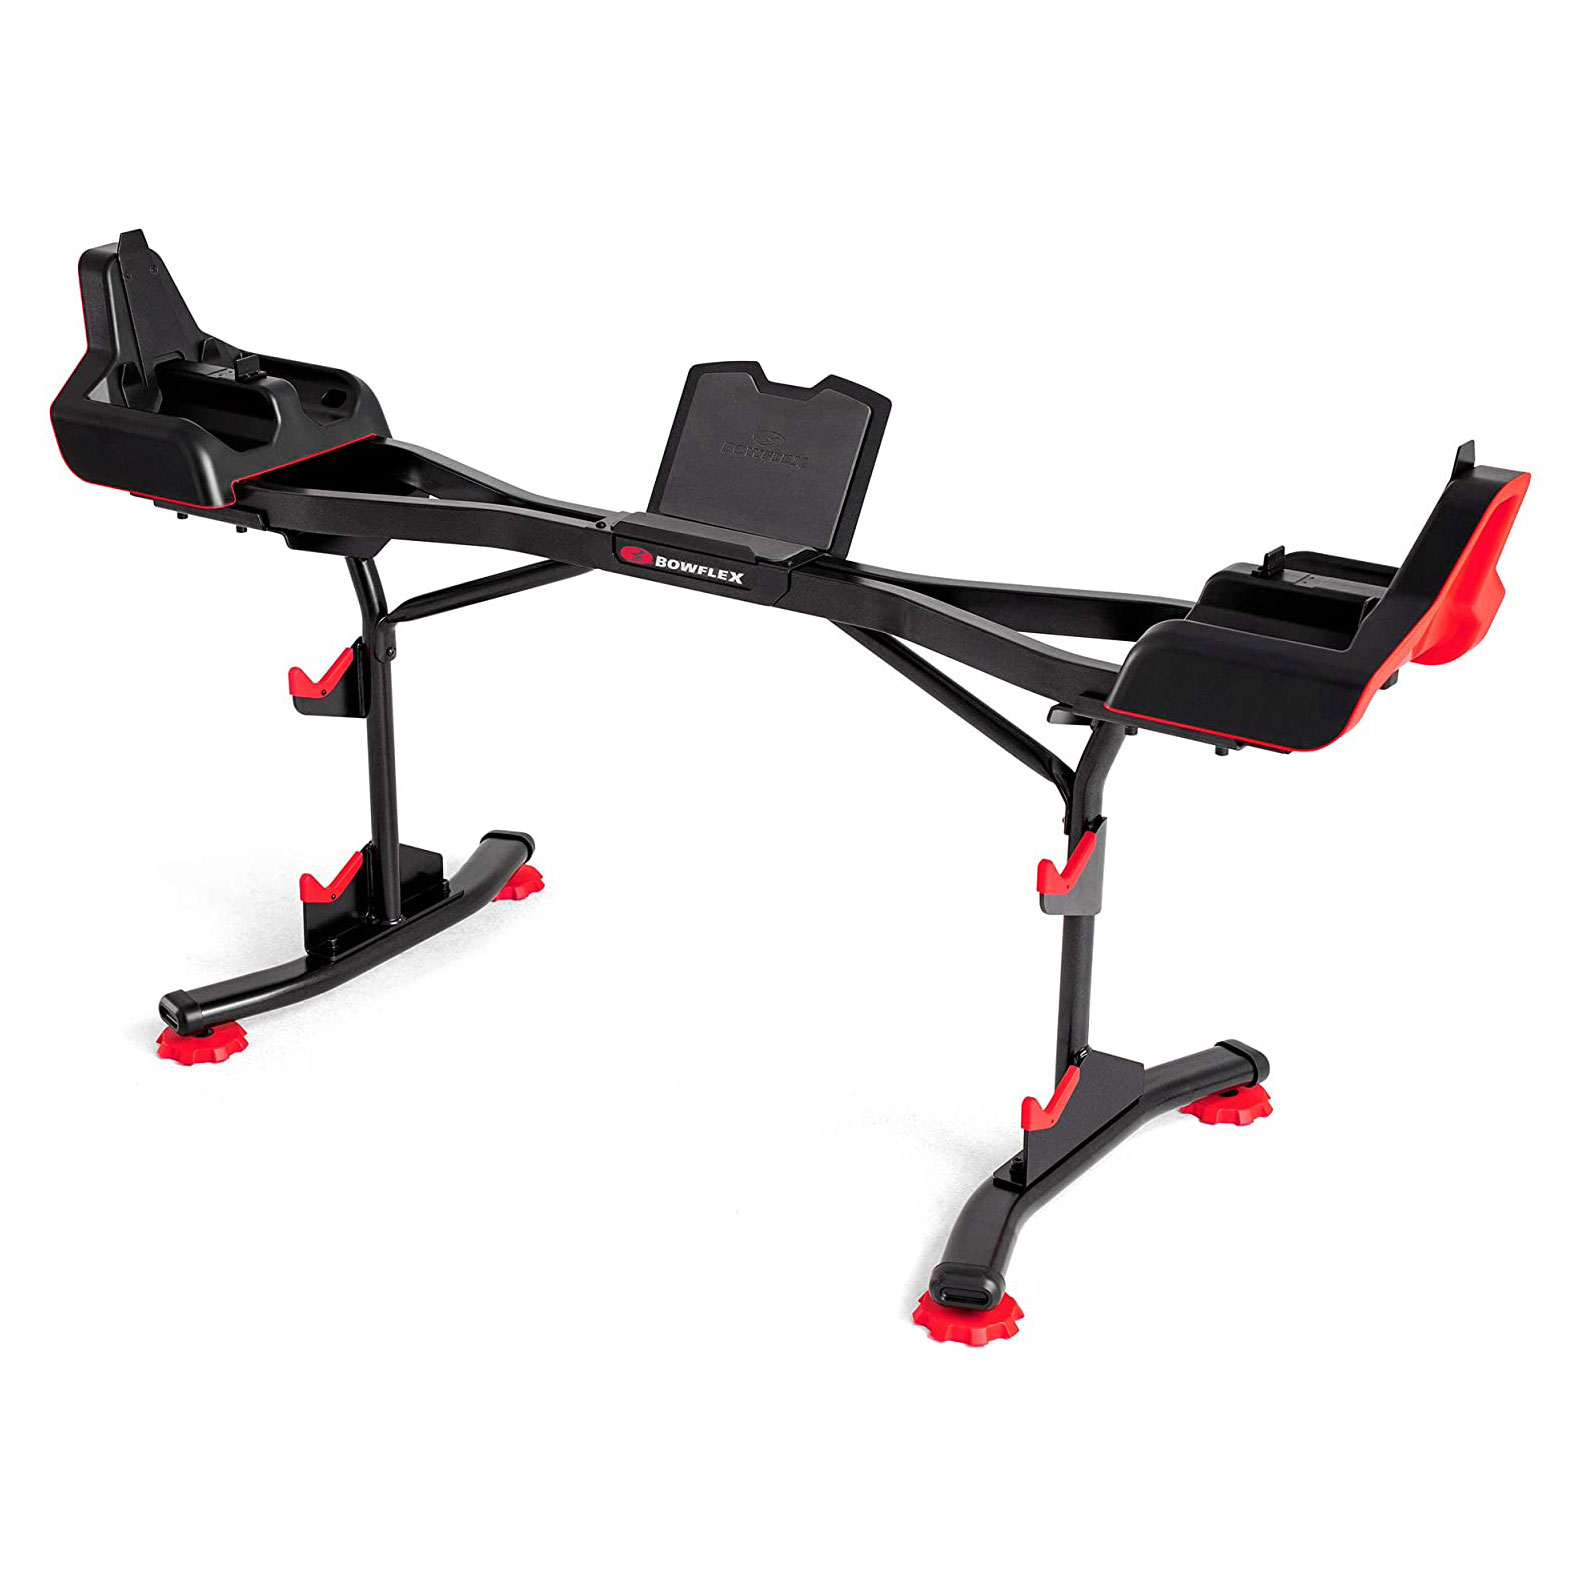 Bowflex SelectTech 2080 Stand with Media Rack for Barbell and Curl Bar - image 1 of 5